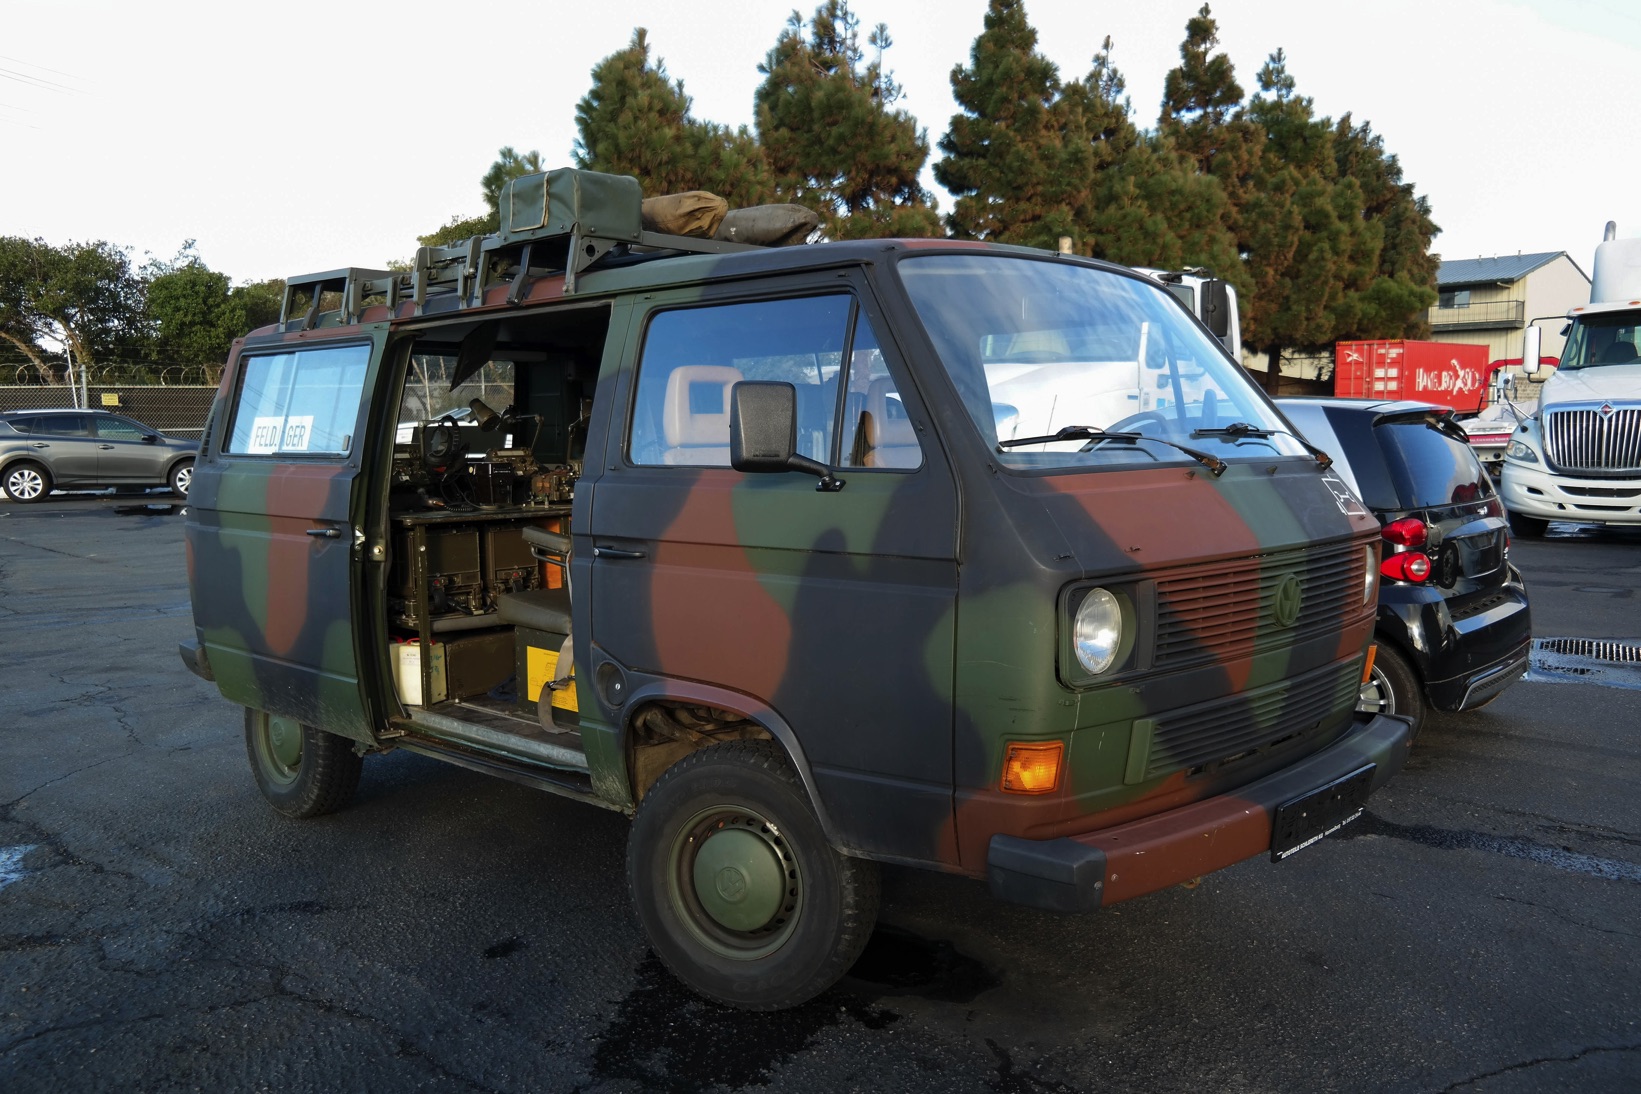 VW Vanagon's Incredible Journey from East Germany to California